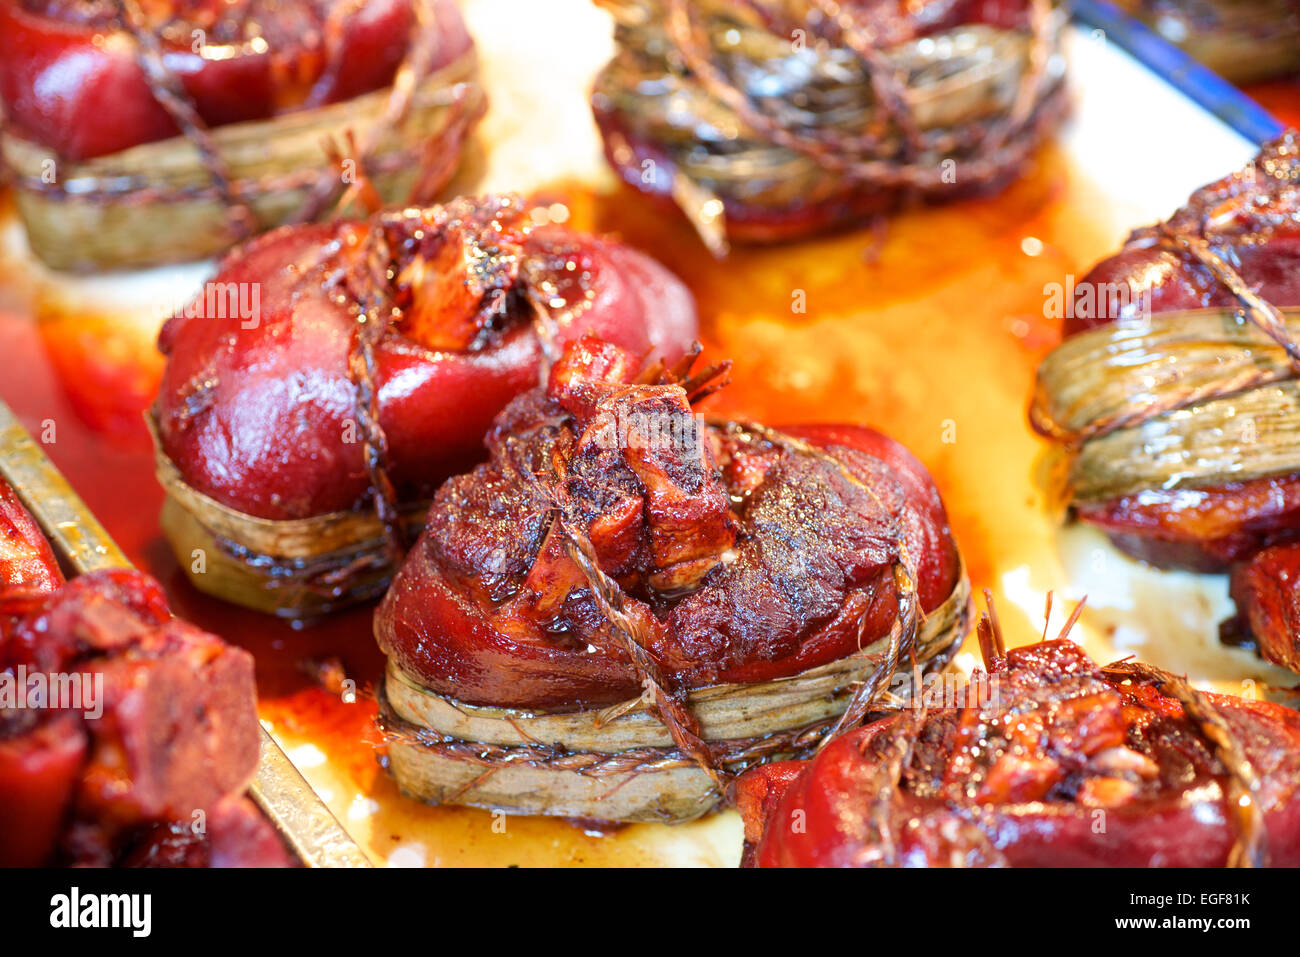 Pork knuckle delicacy food in China Stock Photo